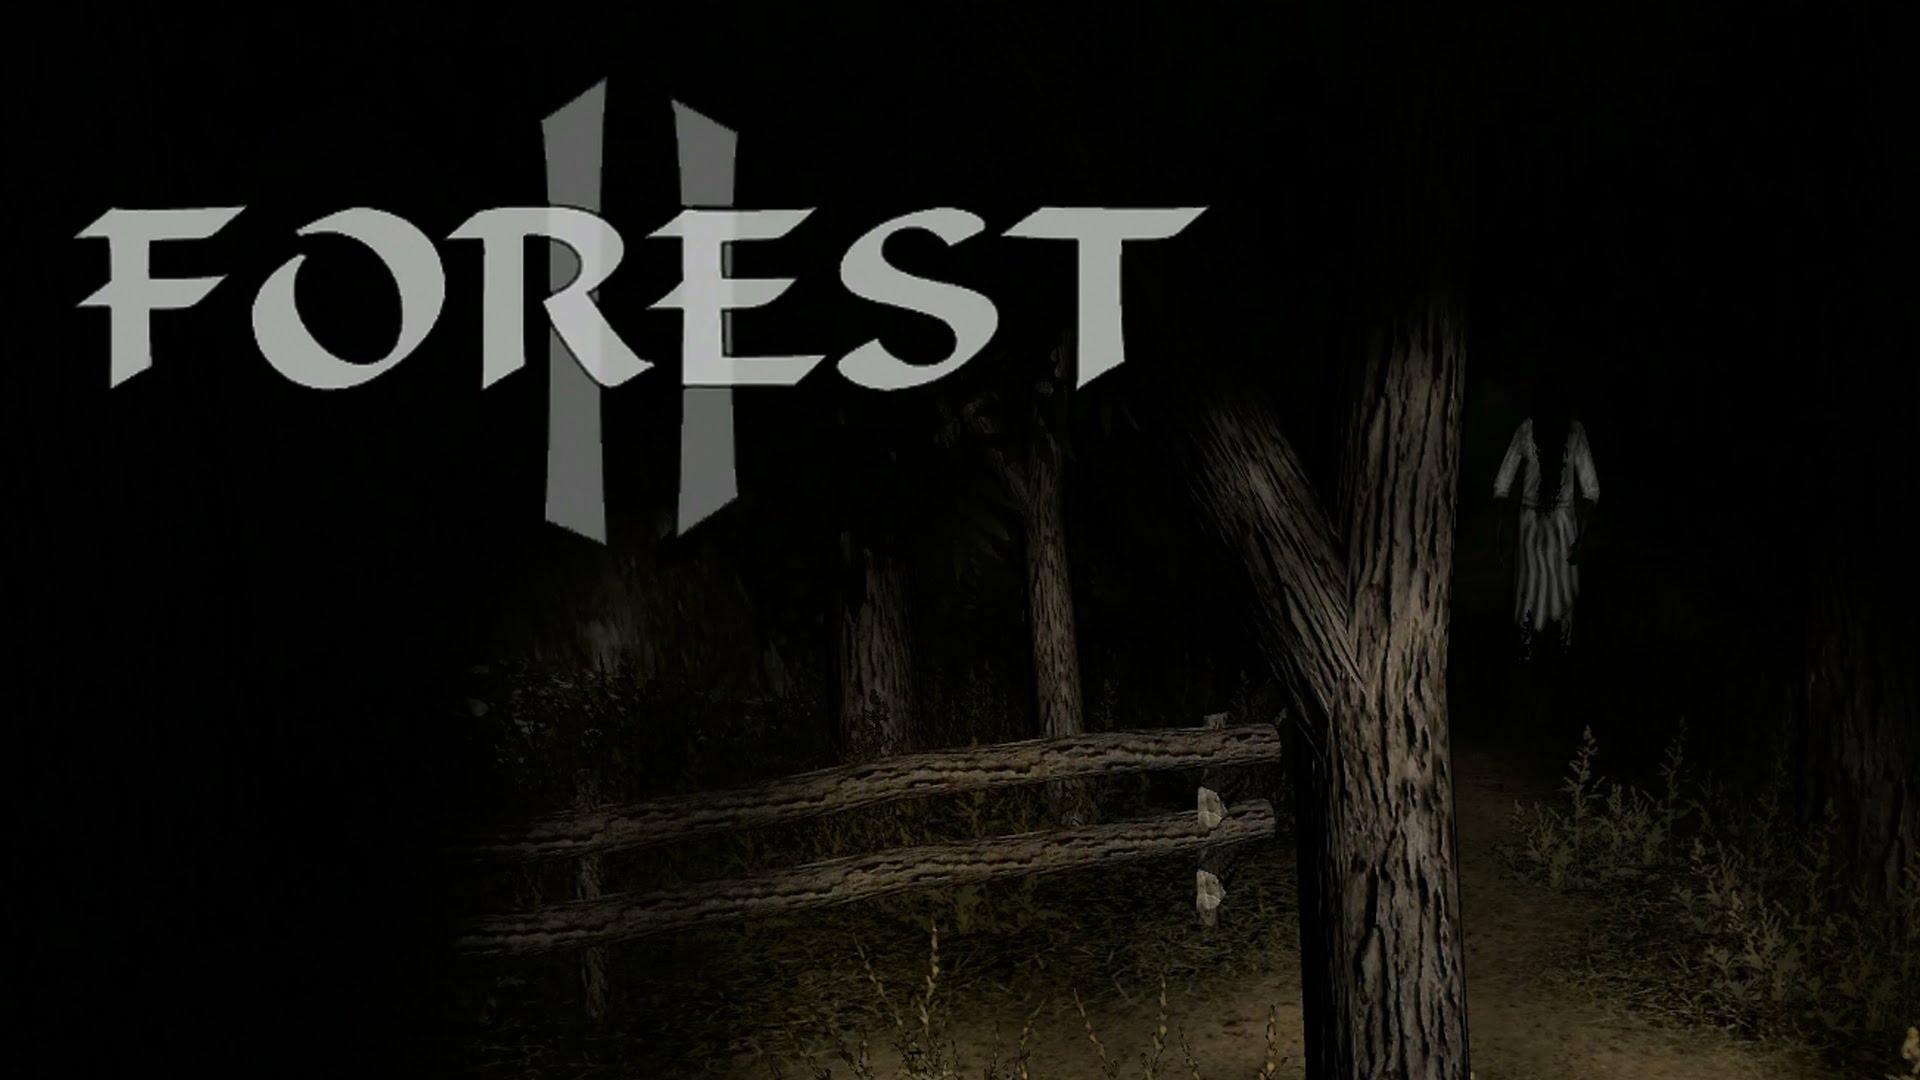 JUEGO TRAMPOSO! [The forest 2] - YouTube